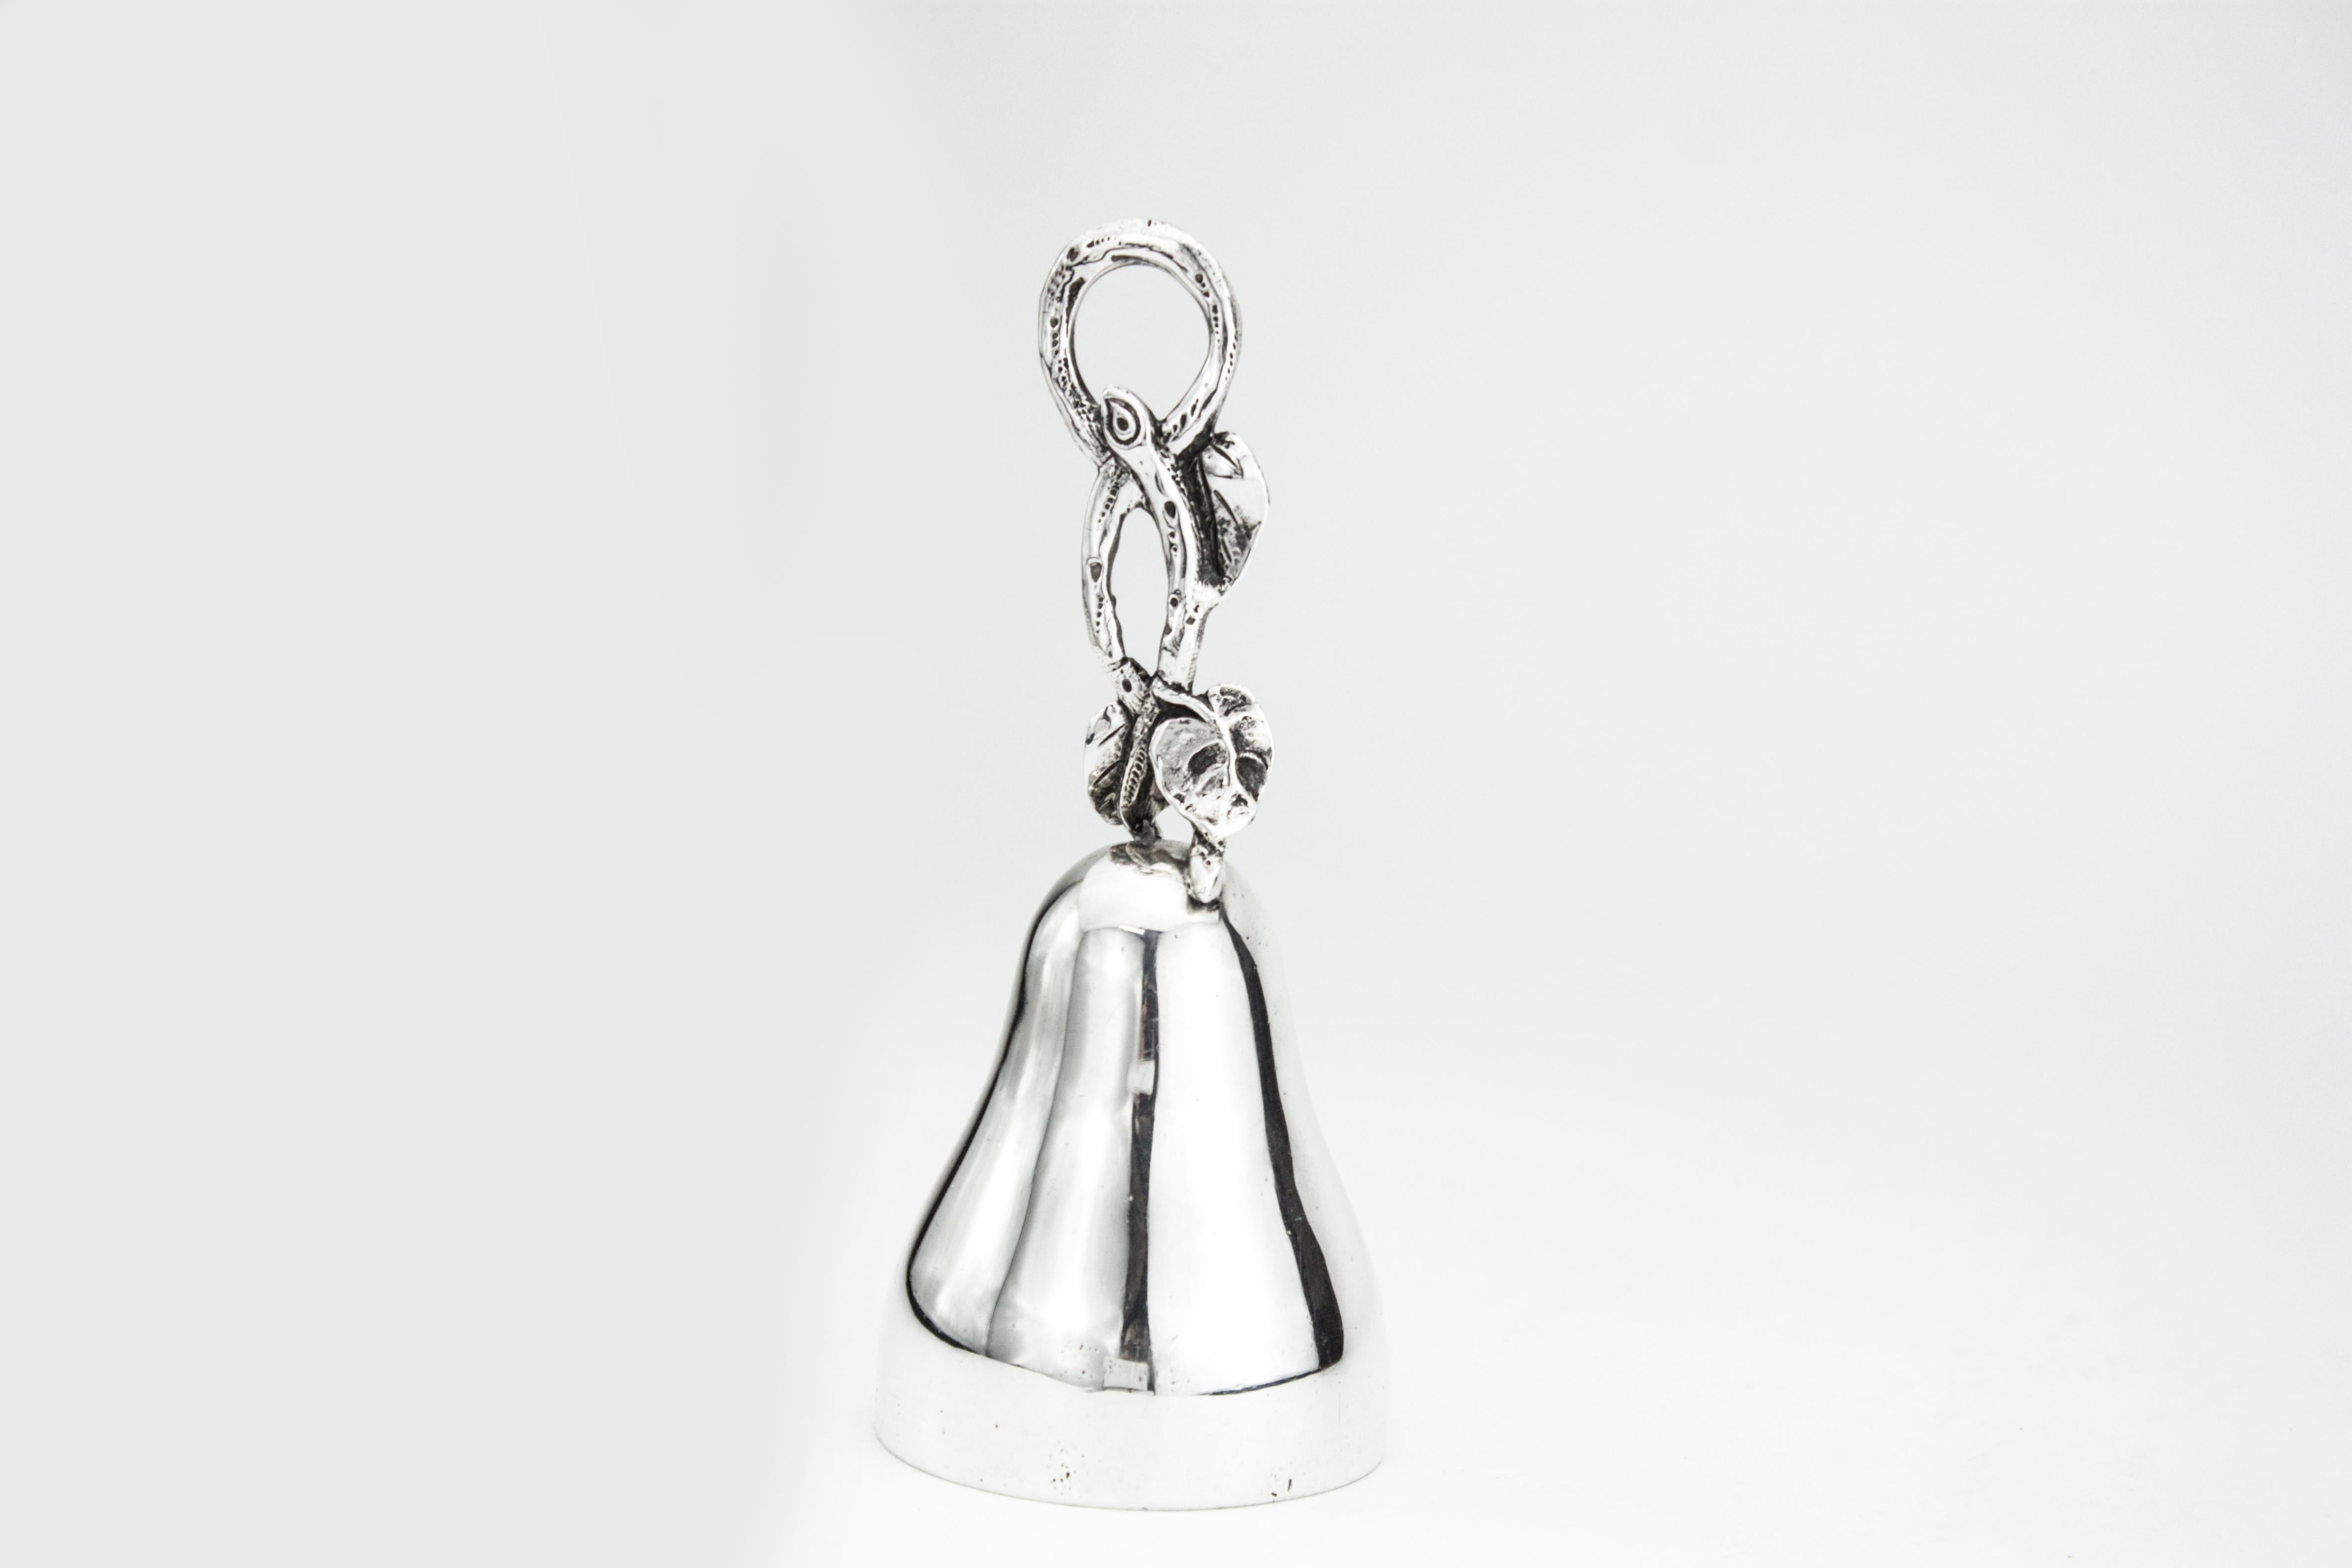 Antique early Edwardian silver table bell
Made in England, London, 1901
Maker: Holland, Aldwinckle & Slater (Thomas Alfred Slater, Walter Brindsley Slater & Henry Arthur Holland)
Fully hallmarked.

Dimensions: Diameter 5 cm x height 11.5